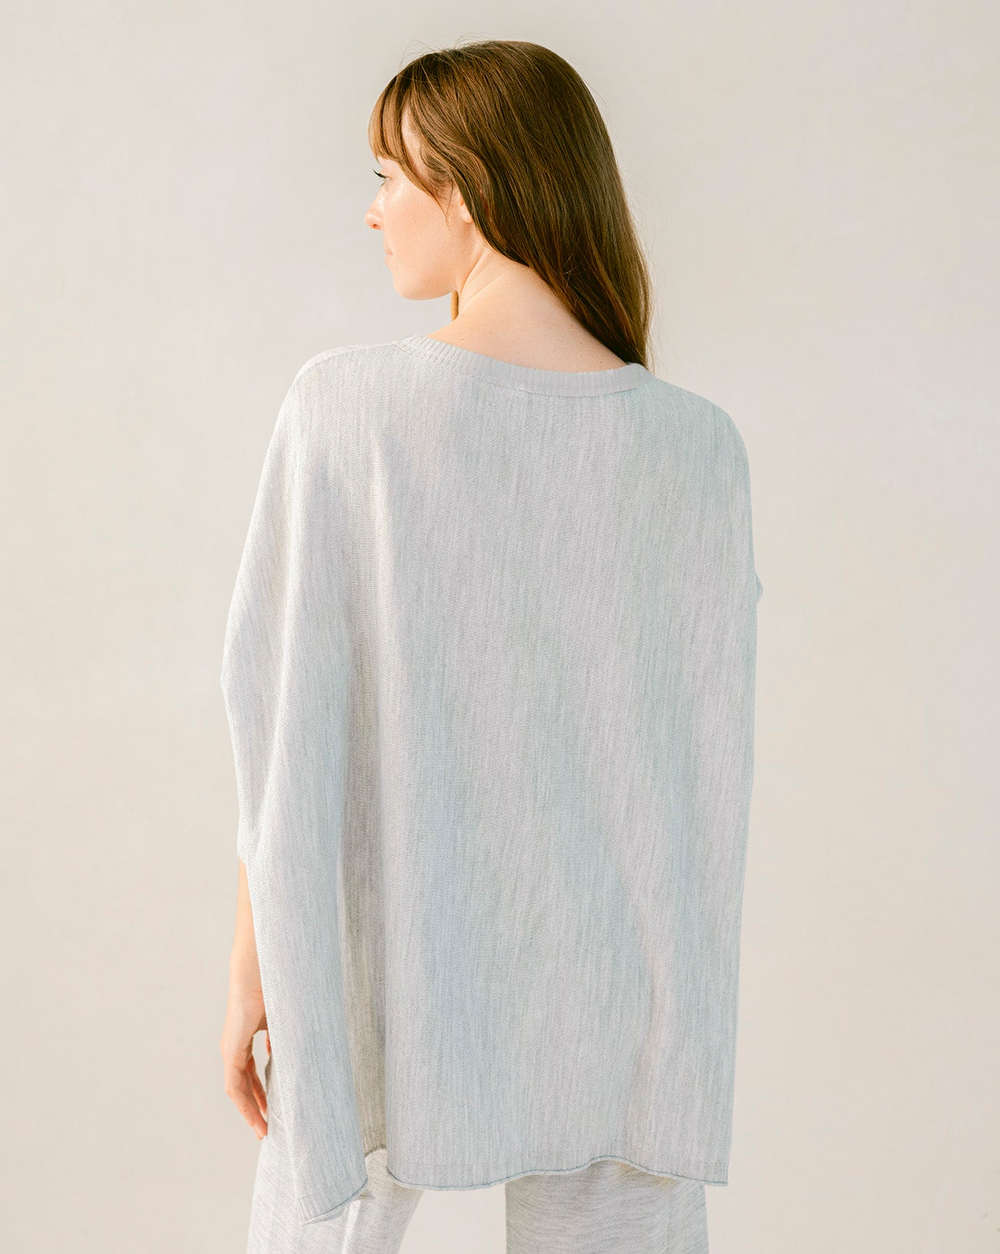 ASH GREY CATALINA SWEATER - Kingfisher Road - Online Boutique